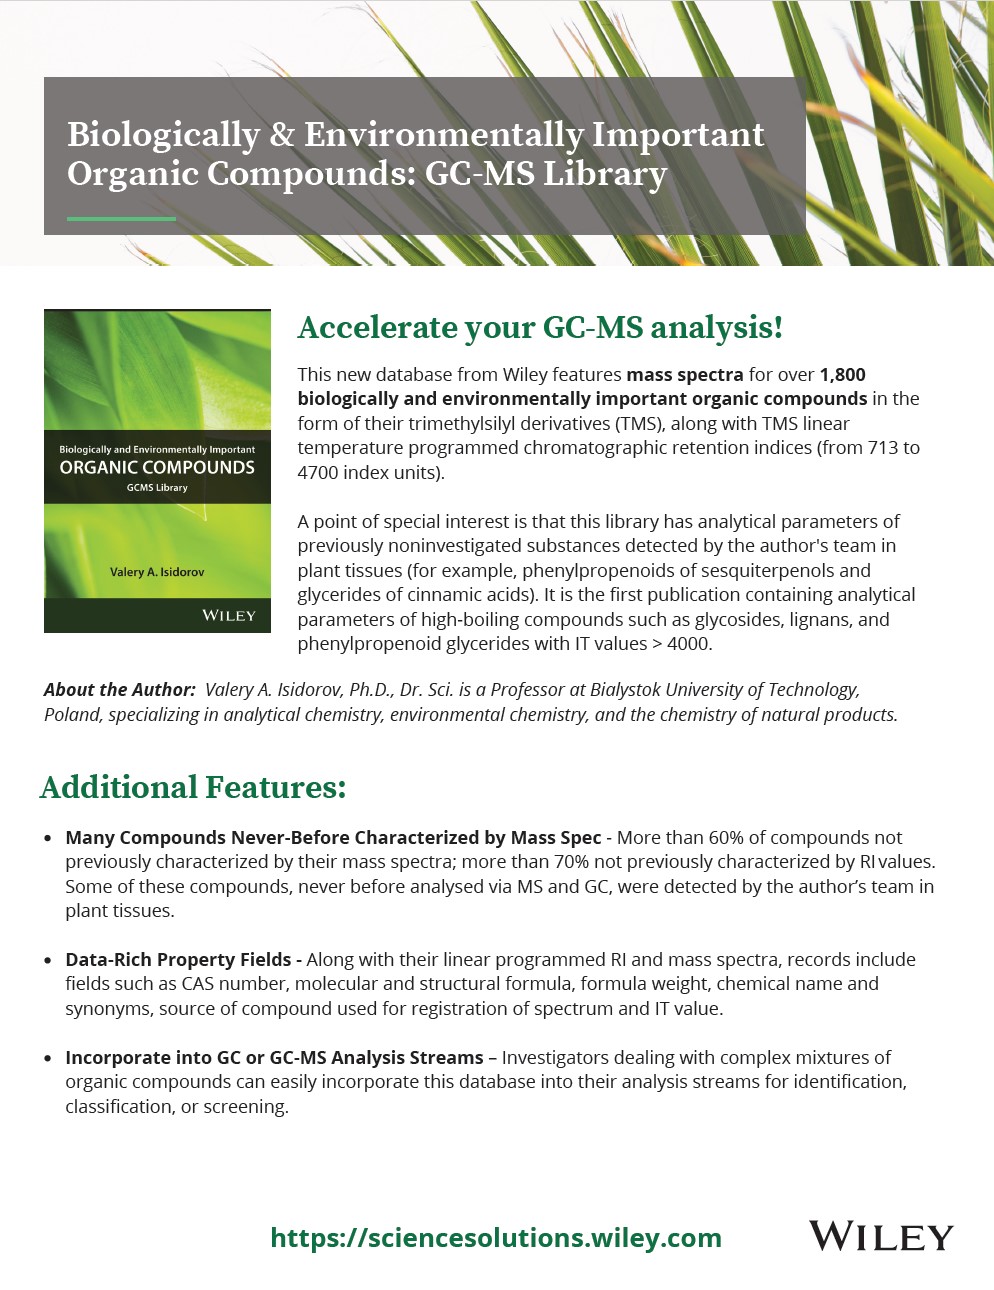 Wiley Biologically and Environmentally Important Organic Compounds: GC-MS Library (Isidorov)